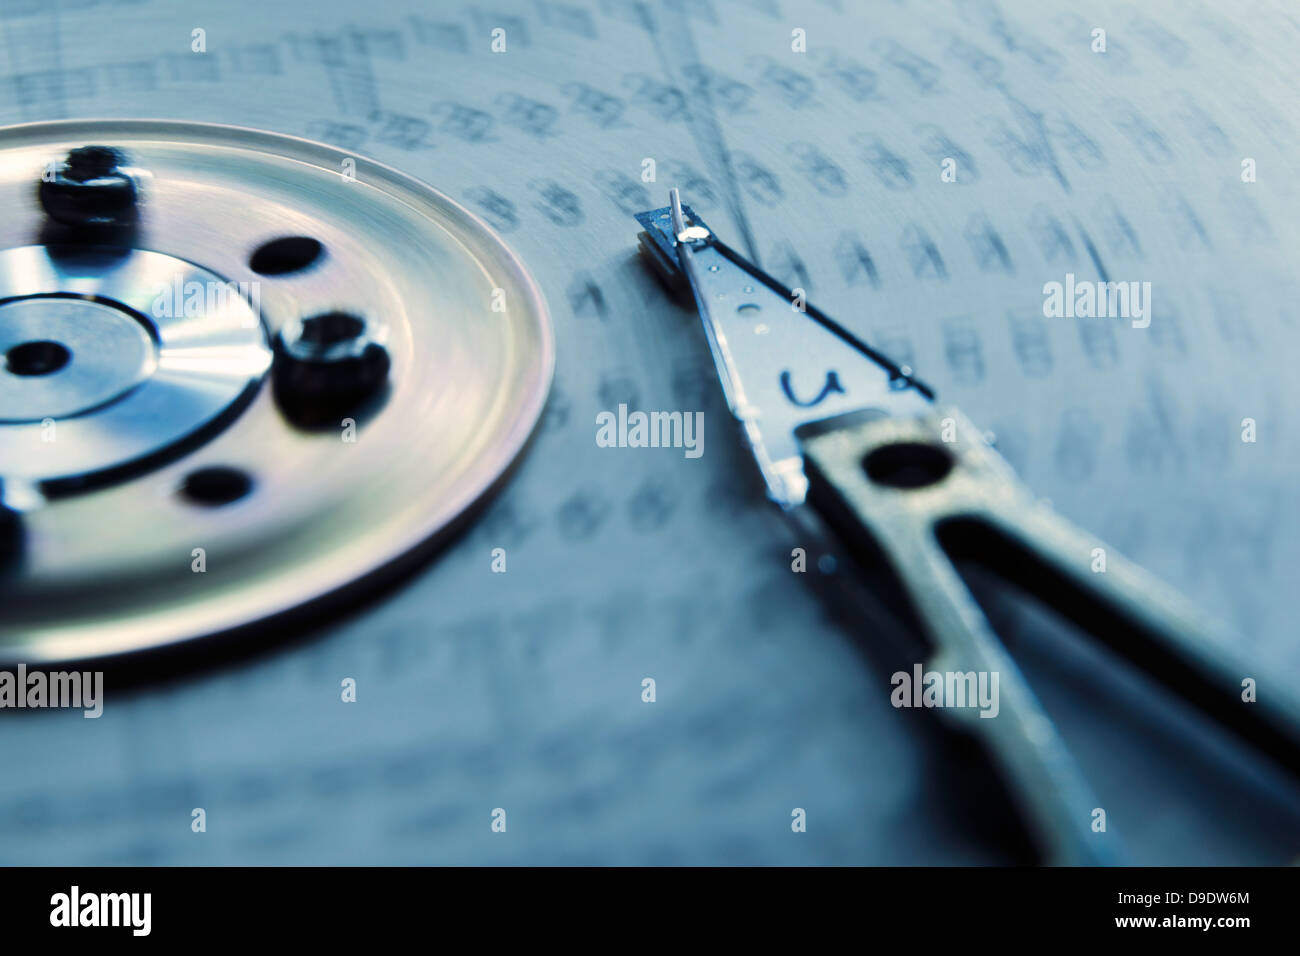 concept image of HDD made from vintage paperboard programming cards with focus on HDD head with disk motion blur Stock Photo